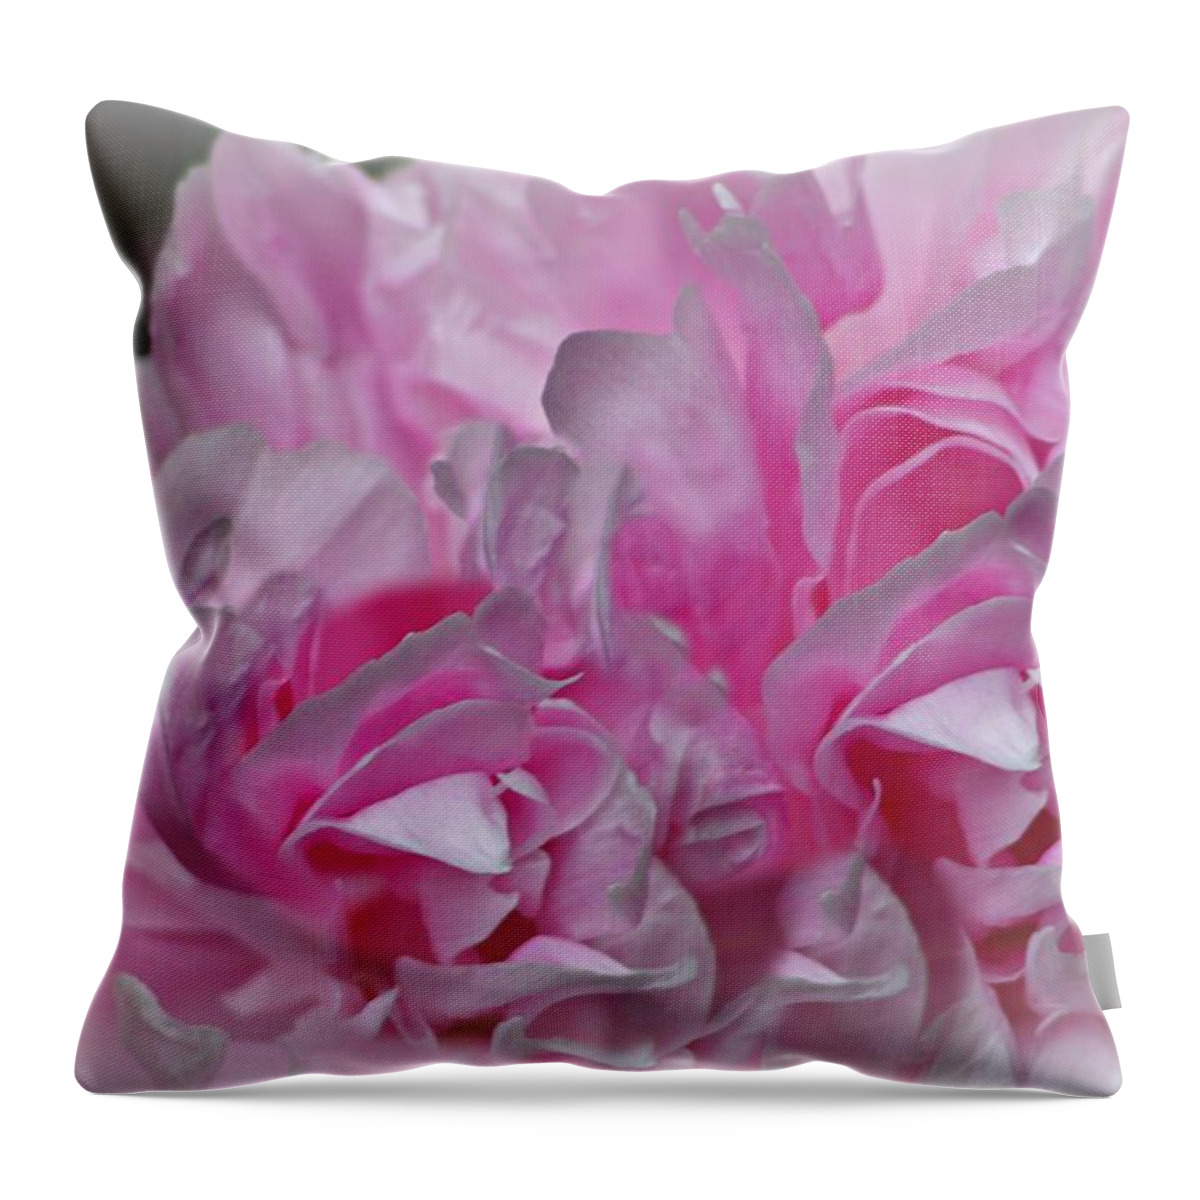 Macro Throw Pillow featuring the photograph Summer by Barbara S Nickerson